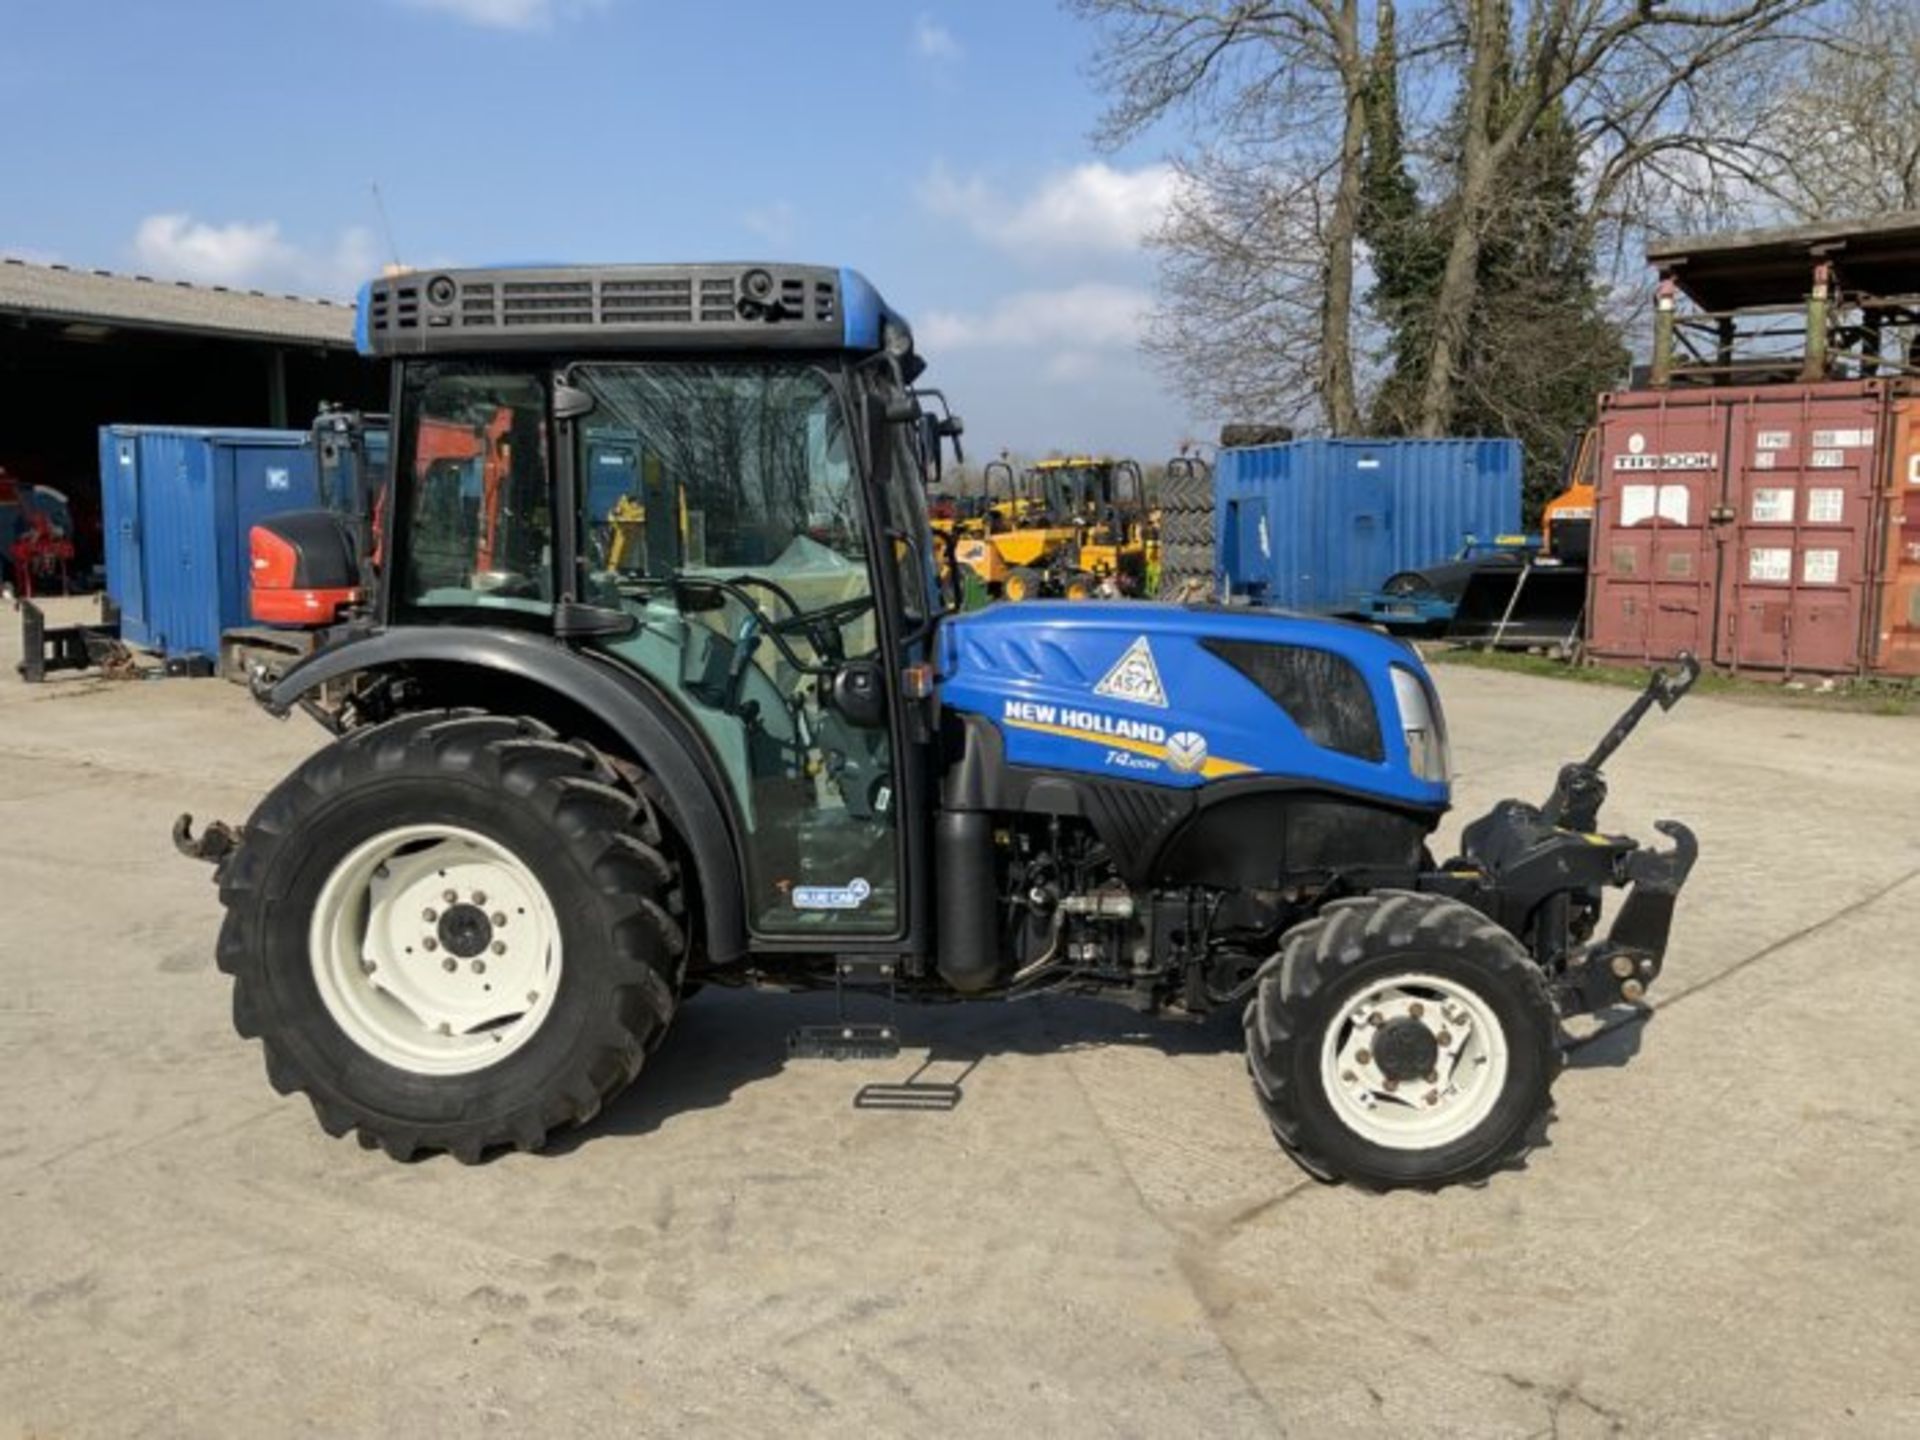 YEAR 2018 NEW HOLLAND T4.100N. FRONT LINKAGE. FRONT P.T.O. SUPER STEER. 3 SPOOLS. AIR CON - Image 5 of 11